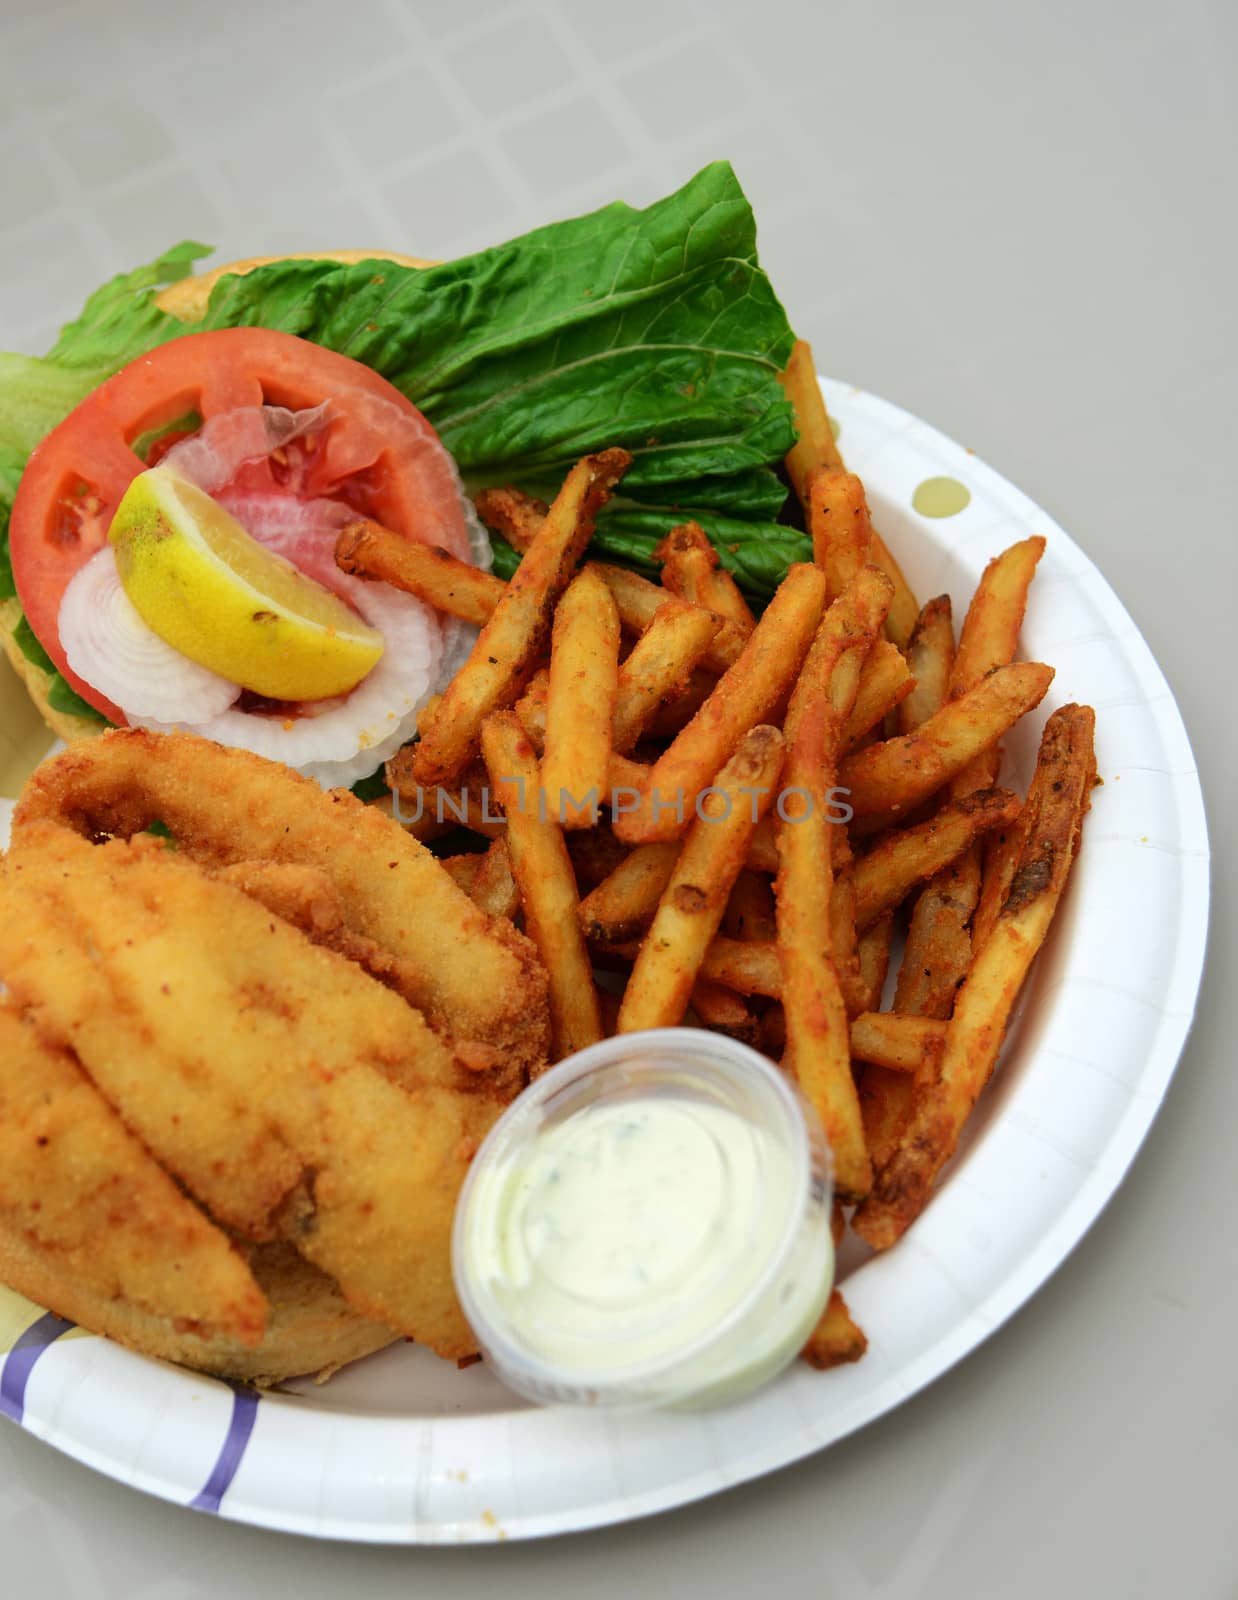 unhealthy meal with fried fish sandwich and fries